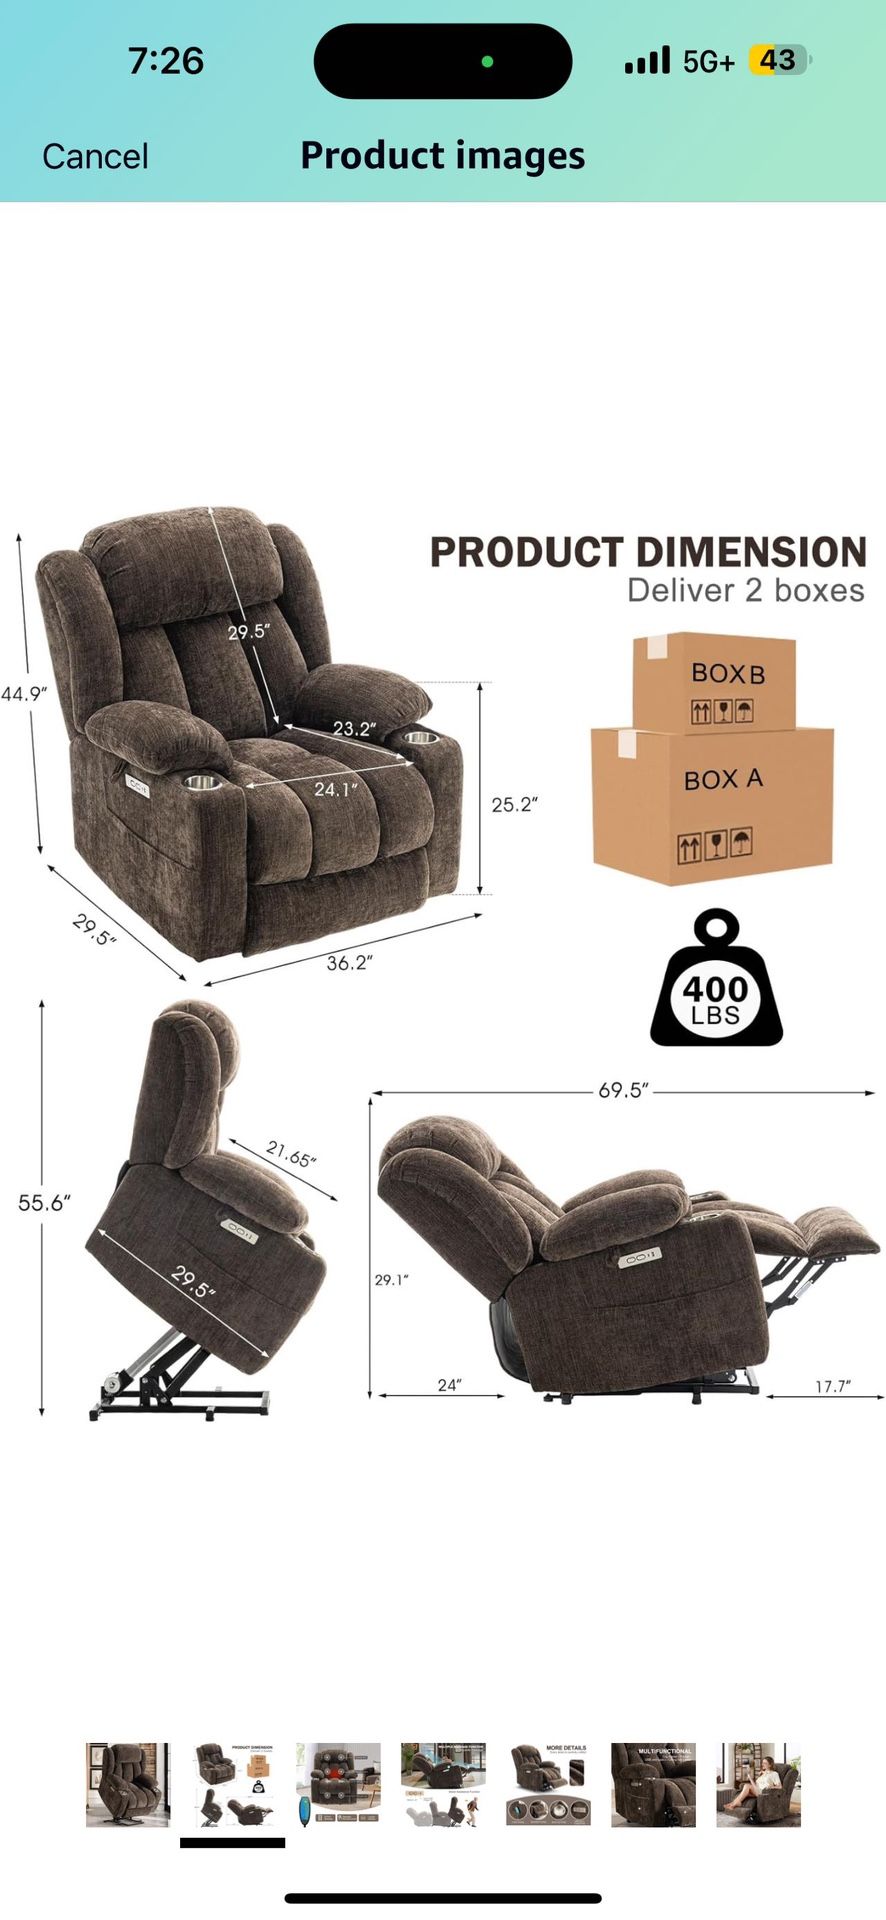 Electric Power Lift Recliner Chair with Heat & Massage for Elderly, Chenille Reclining Chairs for Seniors Home Living Room